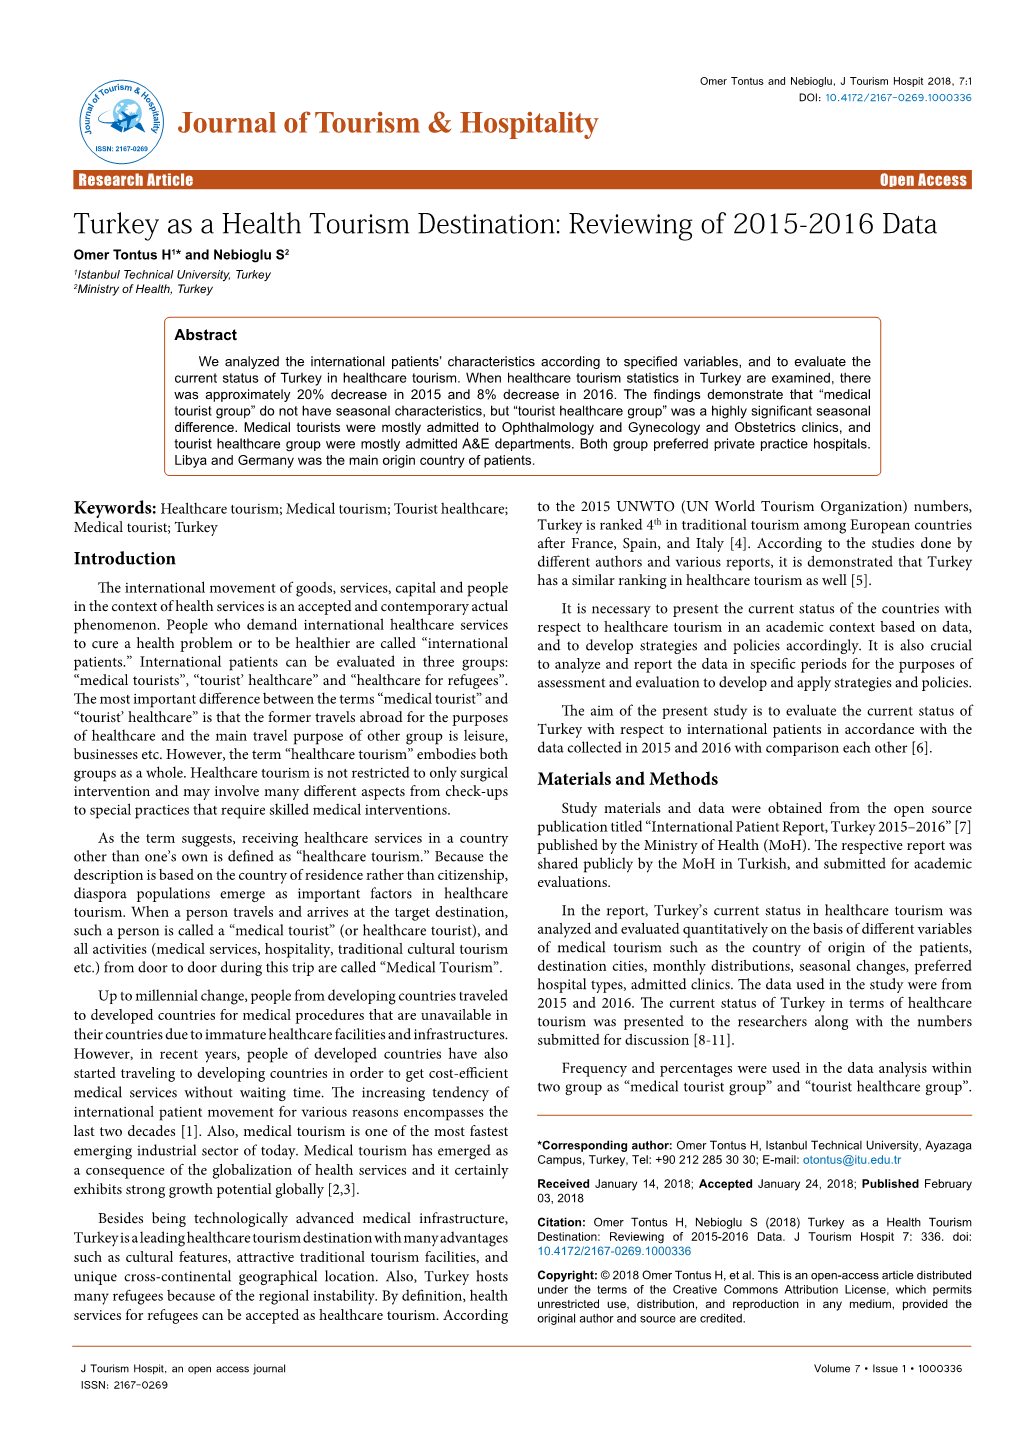 Turkey As a Health Tourism Destination: Reviewing of 2015-2016 Data Omer Tontus H1* and Nebioglu S2 1Istanbul Technical University, Turkey 2Ministry of Health, Turkey